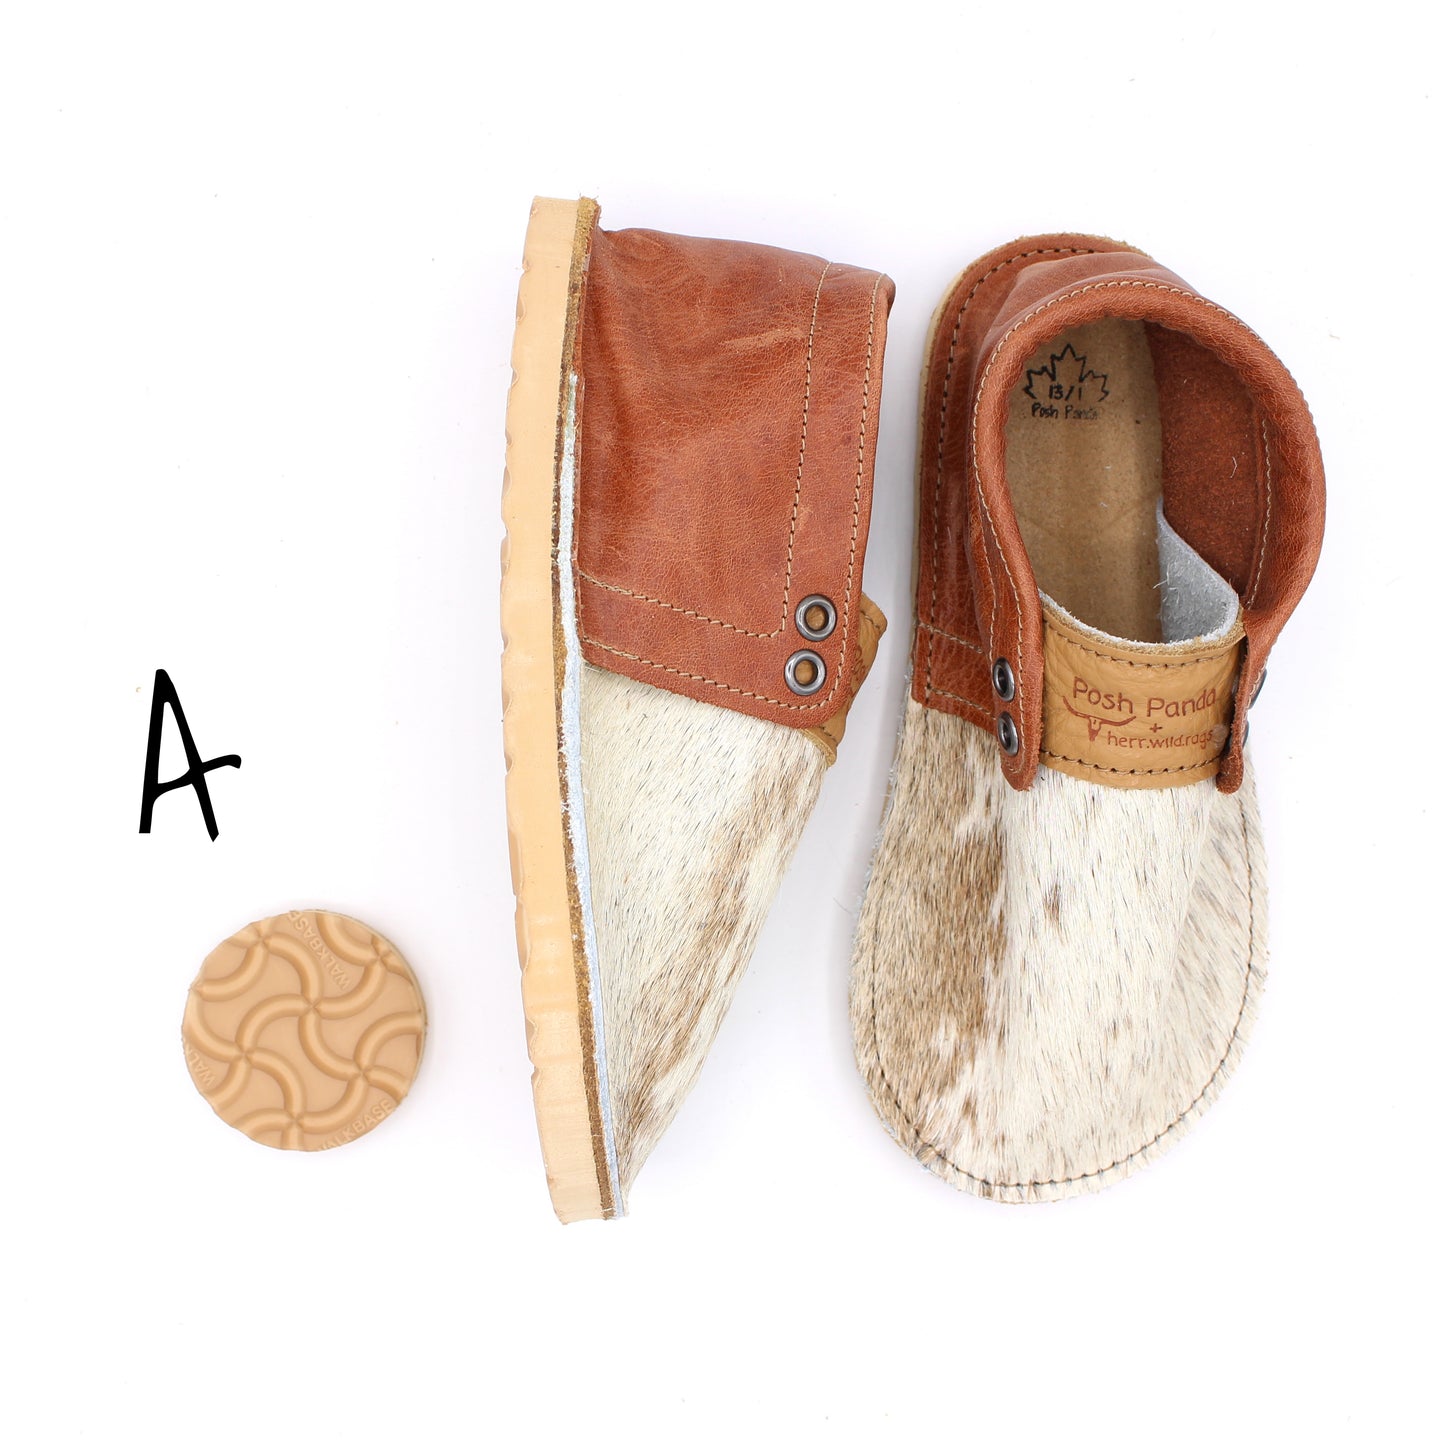 Hair Hide Mocs - YOUTH - Size 13/1 (RUGGED Sole)